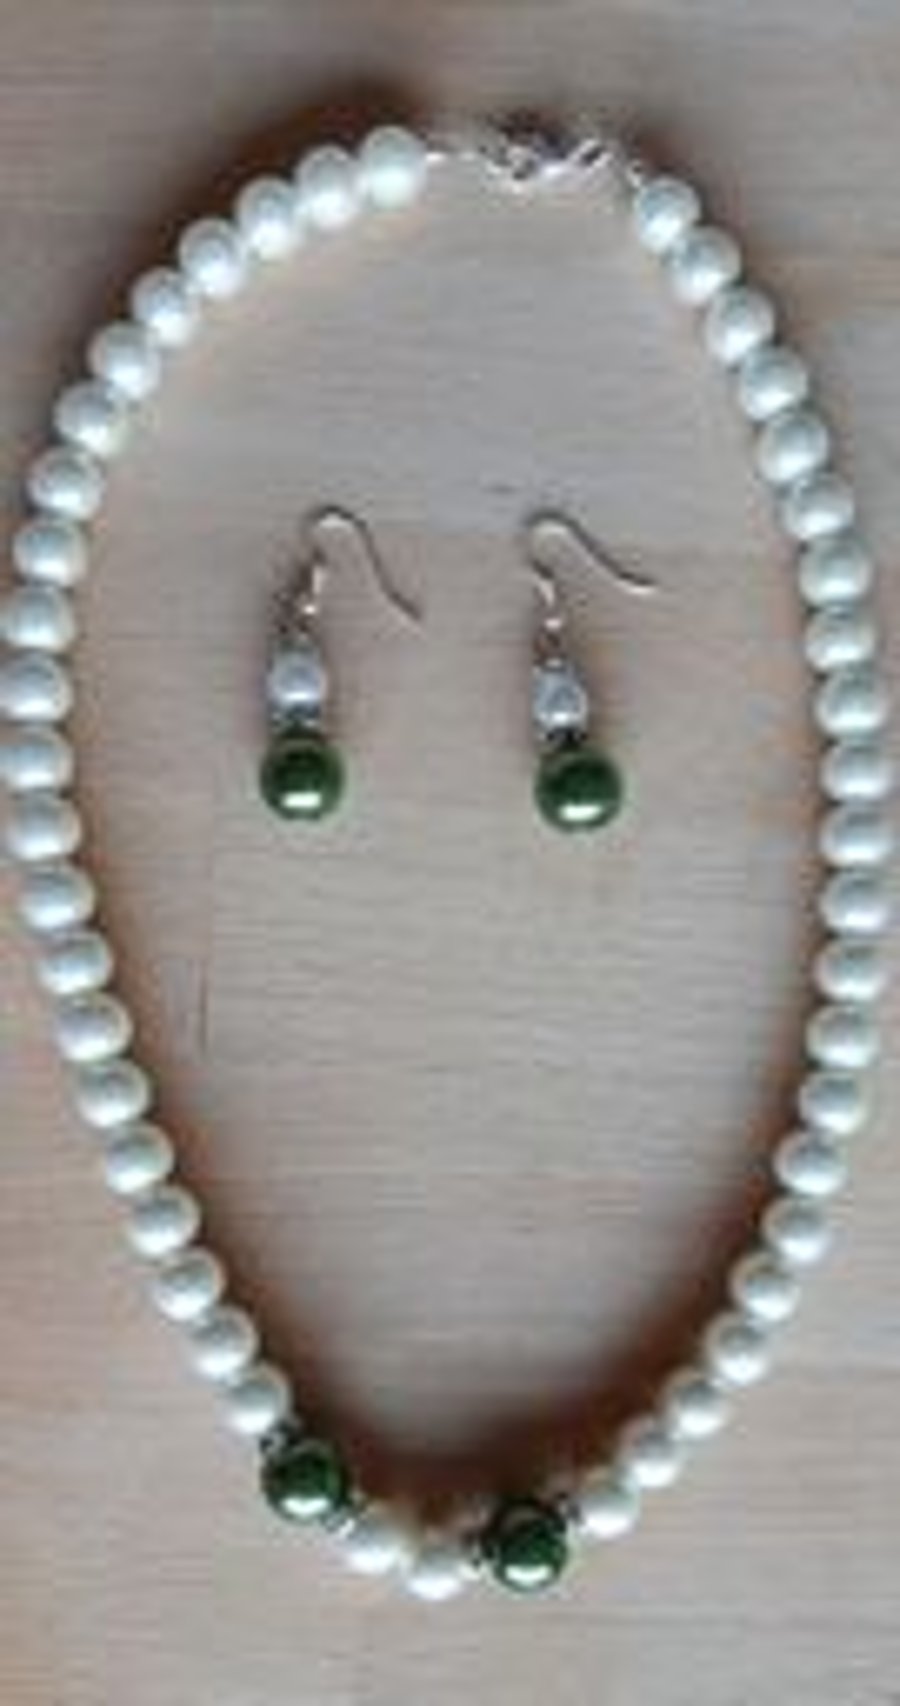 White pearl necklace with green pearls